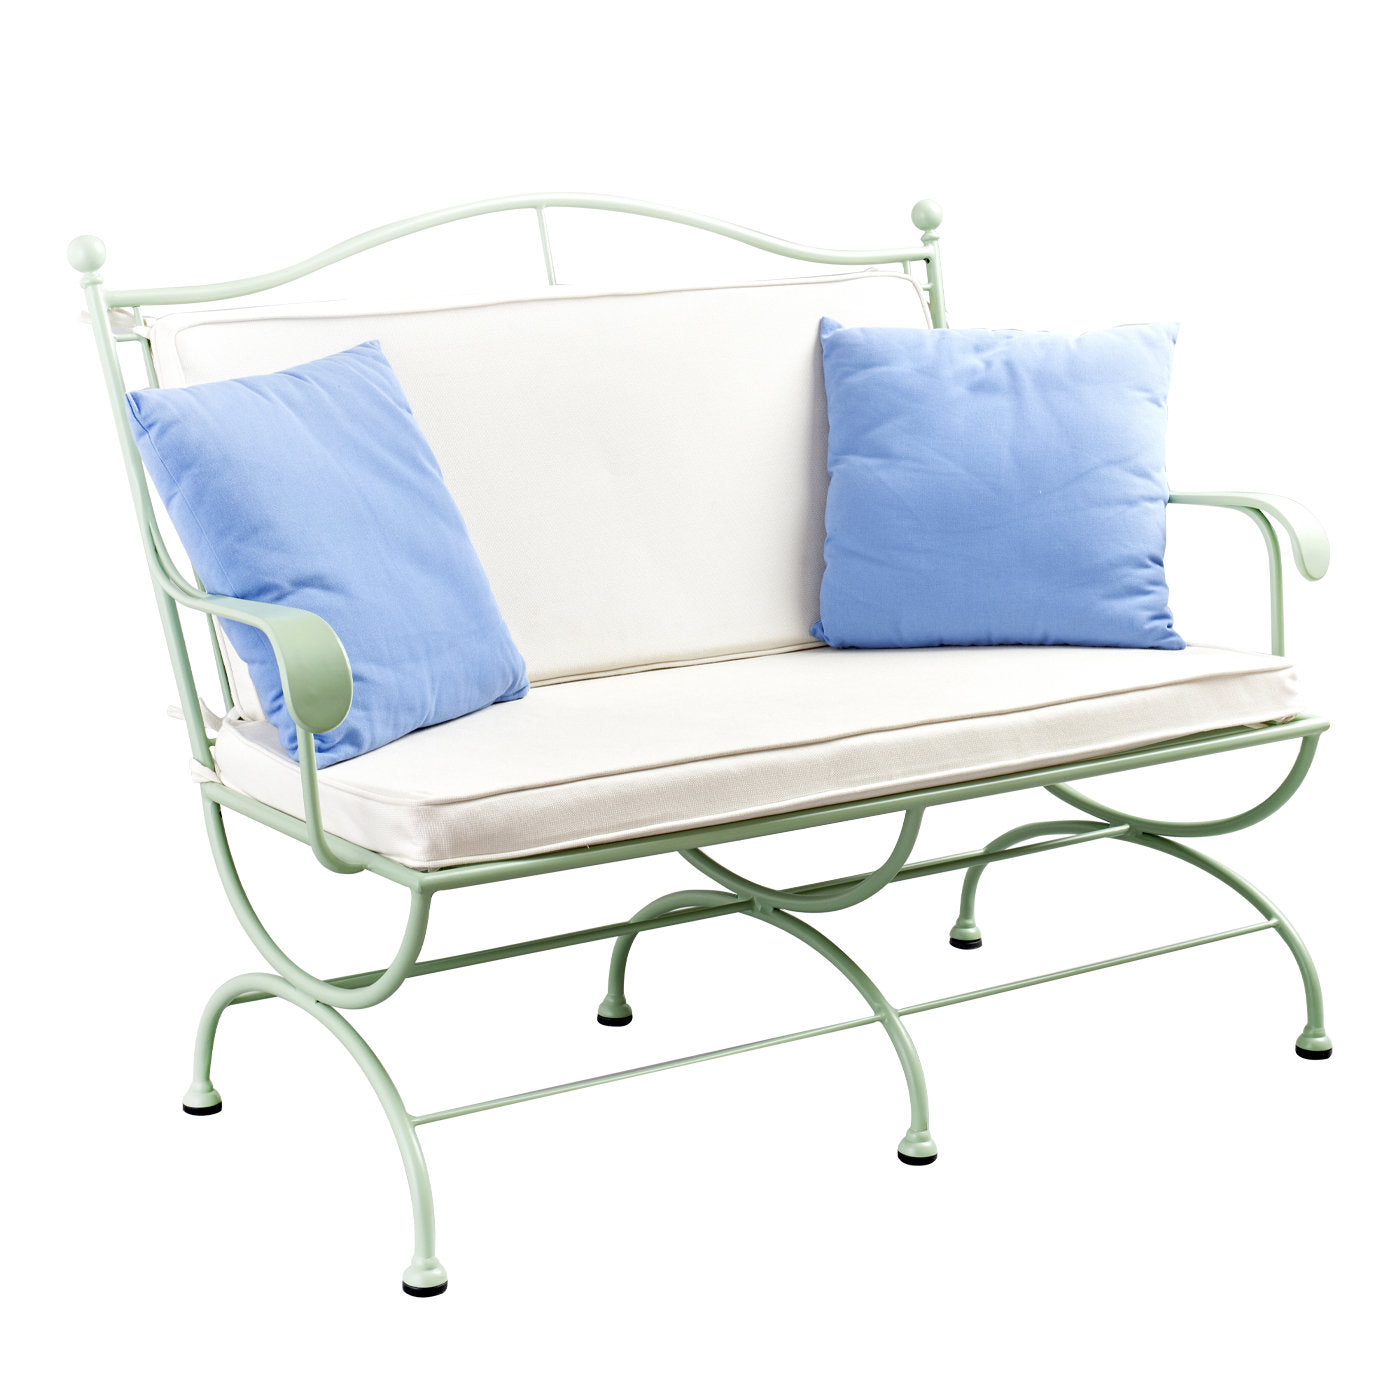 Rombo Outdoor Green Wrought Sofa in Stainless Steel - Main view